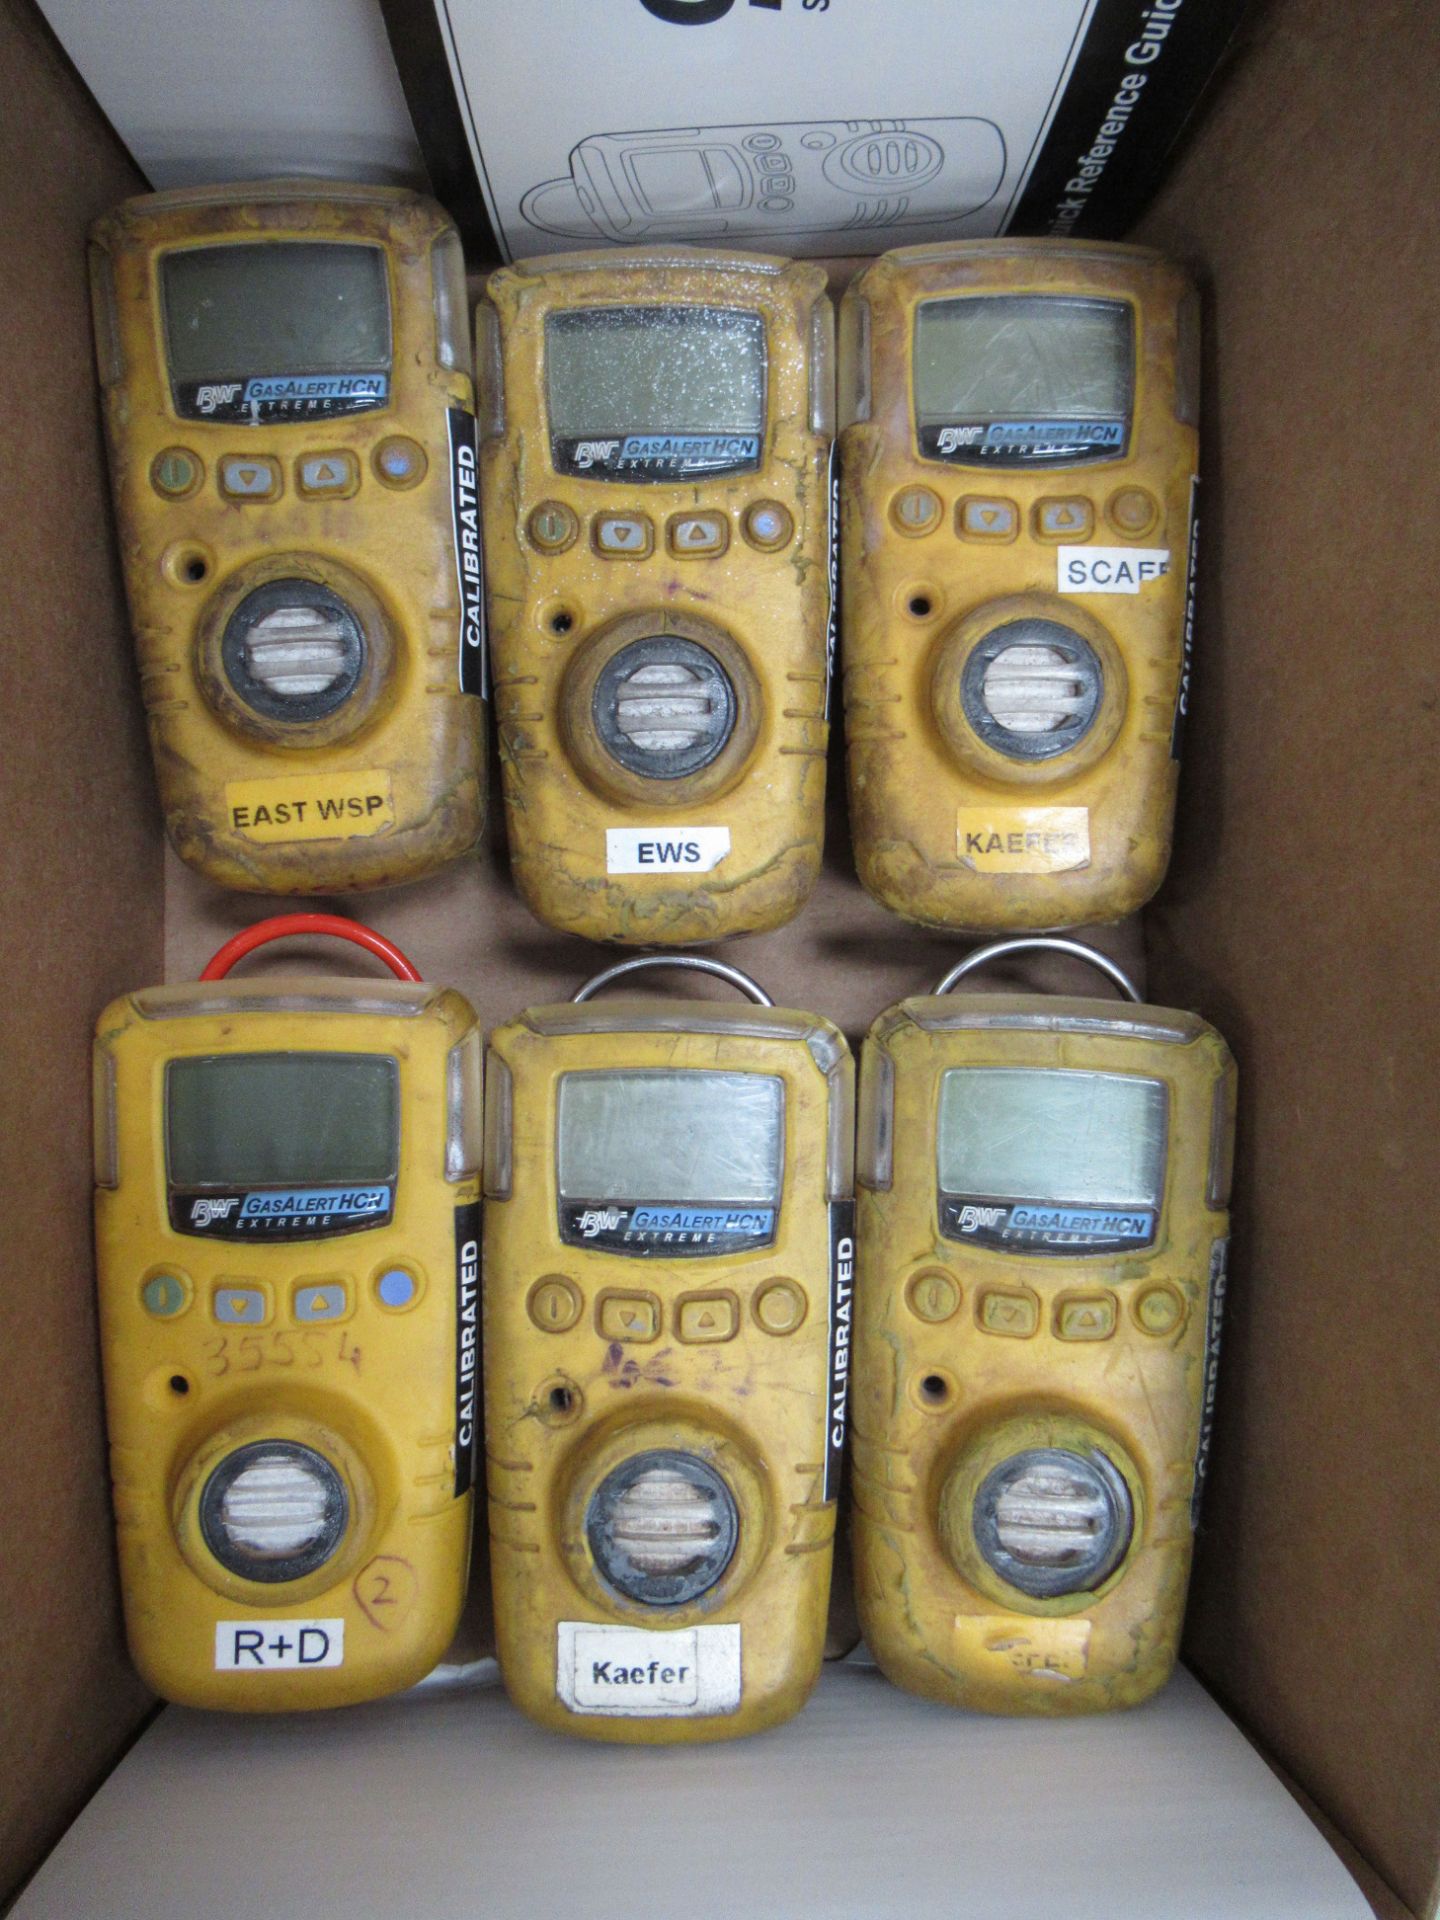 12x BW (By Honeywell) Gas Alert HCNExtreme Gas Detectors - Image 4 of 4